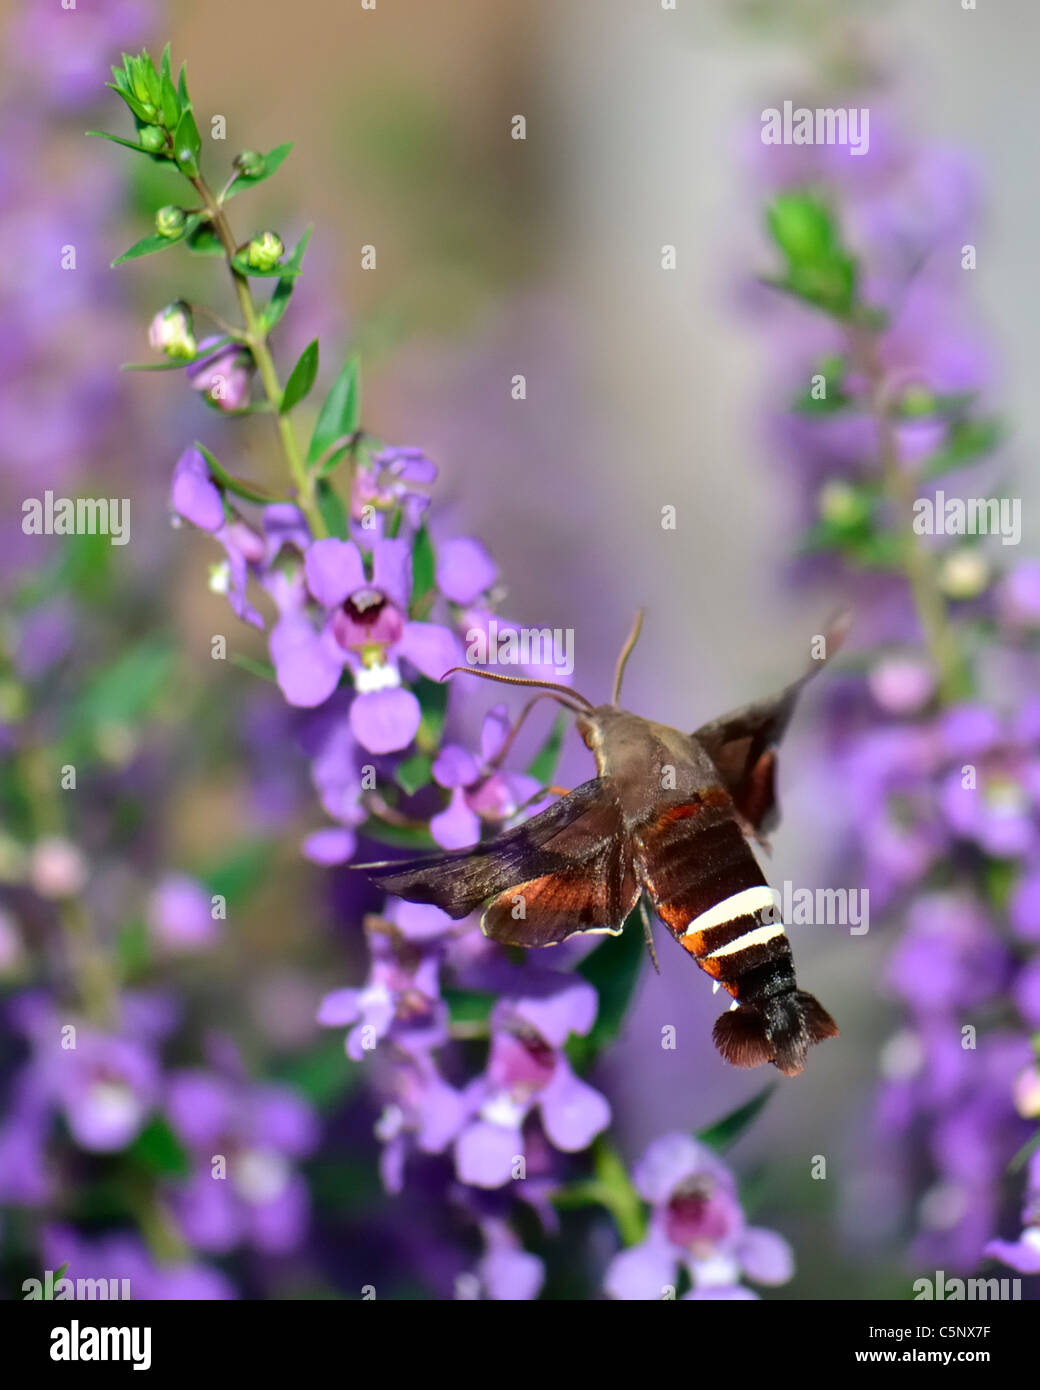 Nessus Sphinx moth, Amphion floridensis nectaring on Angelonia serena flowers. Stock Photo